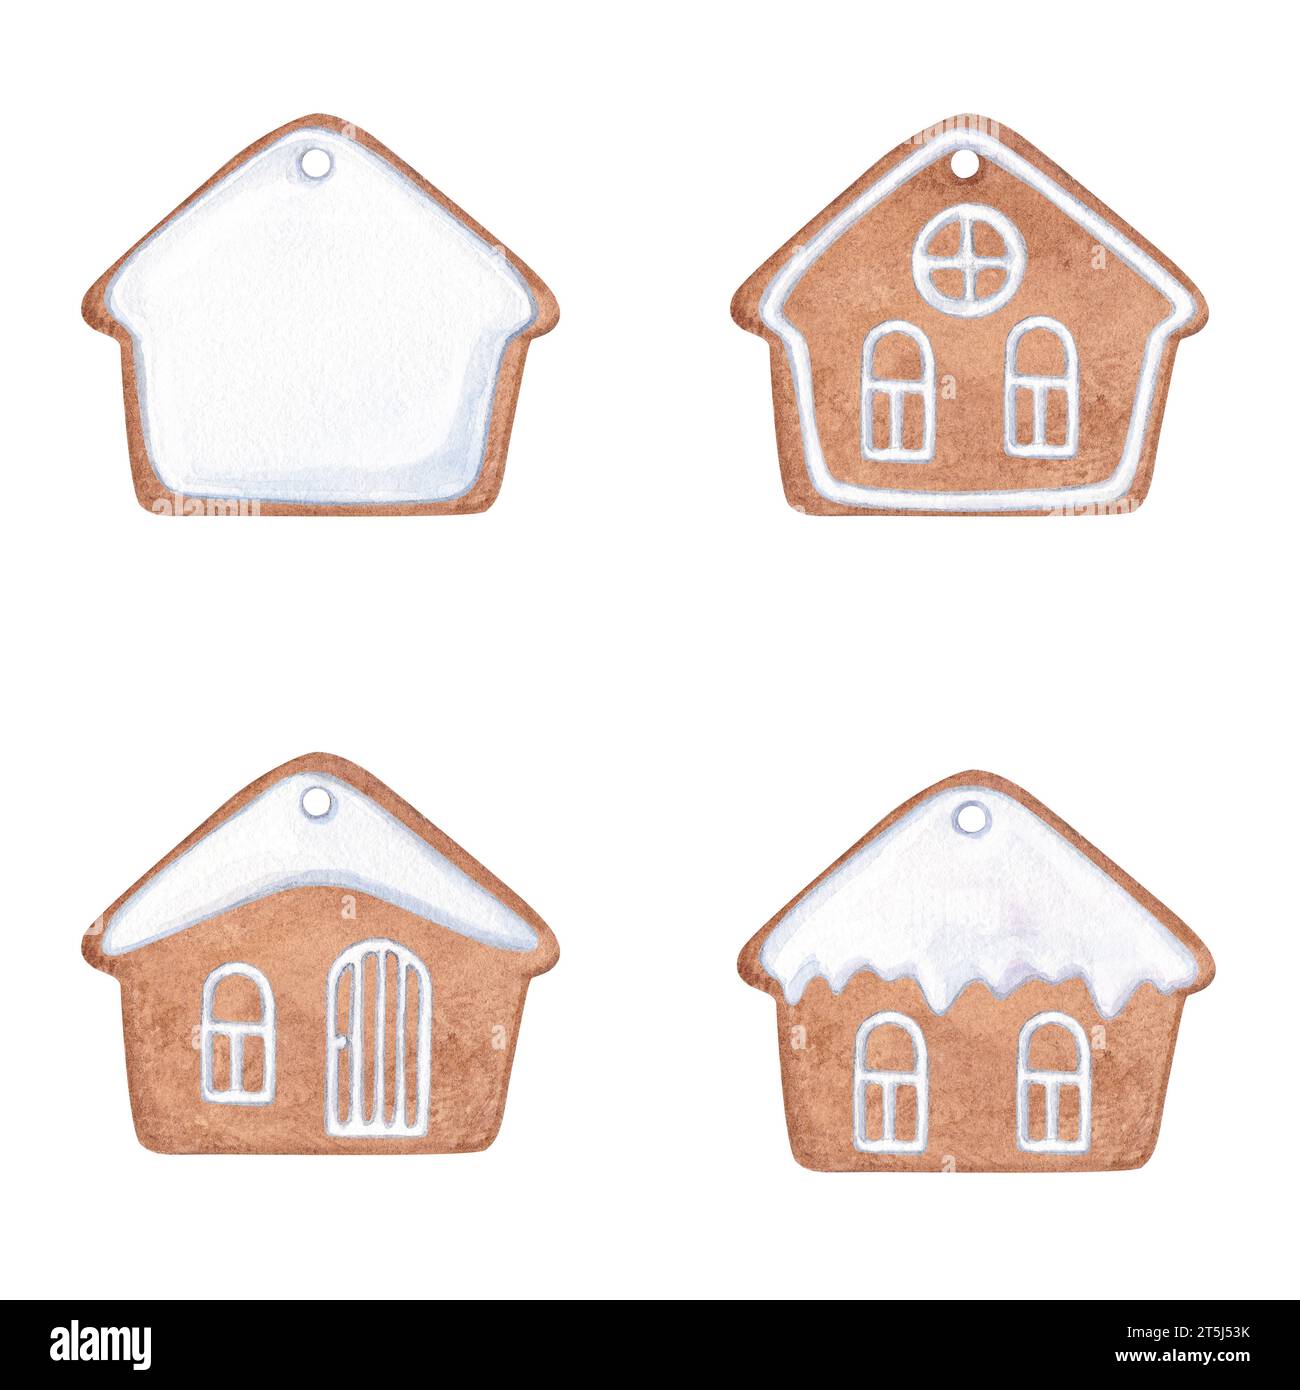 https://c8.alamy.com/comp/2T5J53K/set-of-gingerbread-cookies-watercolor-hand-drawn-illustration-of-new-years-traditional-sweets-clipart-on-a-white-background-on-the-theme-of-the-chr-2T5J53K.jpg